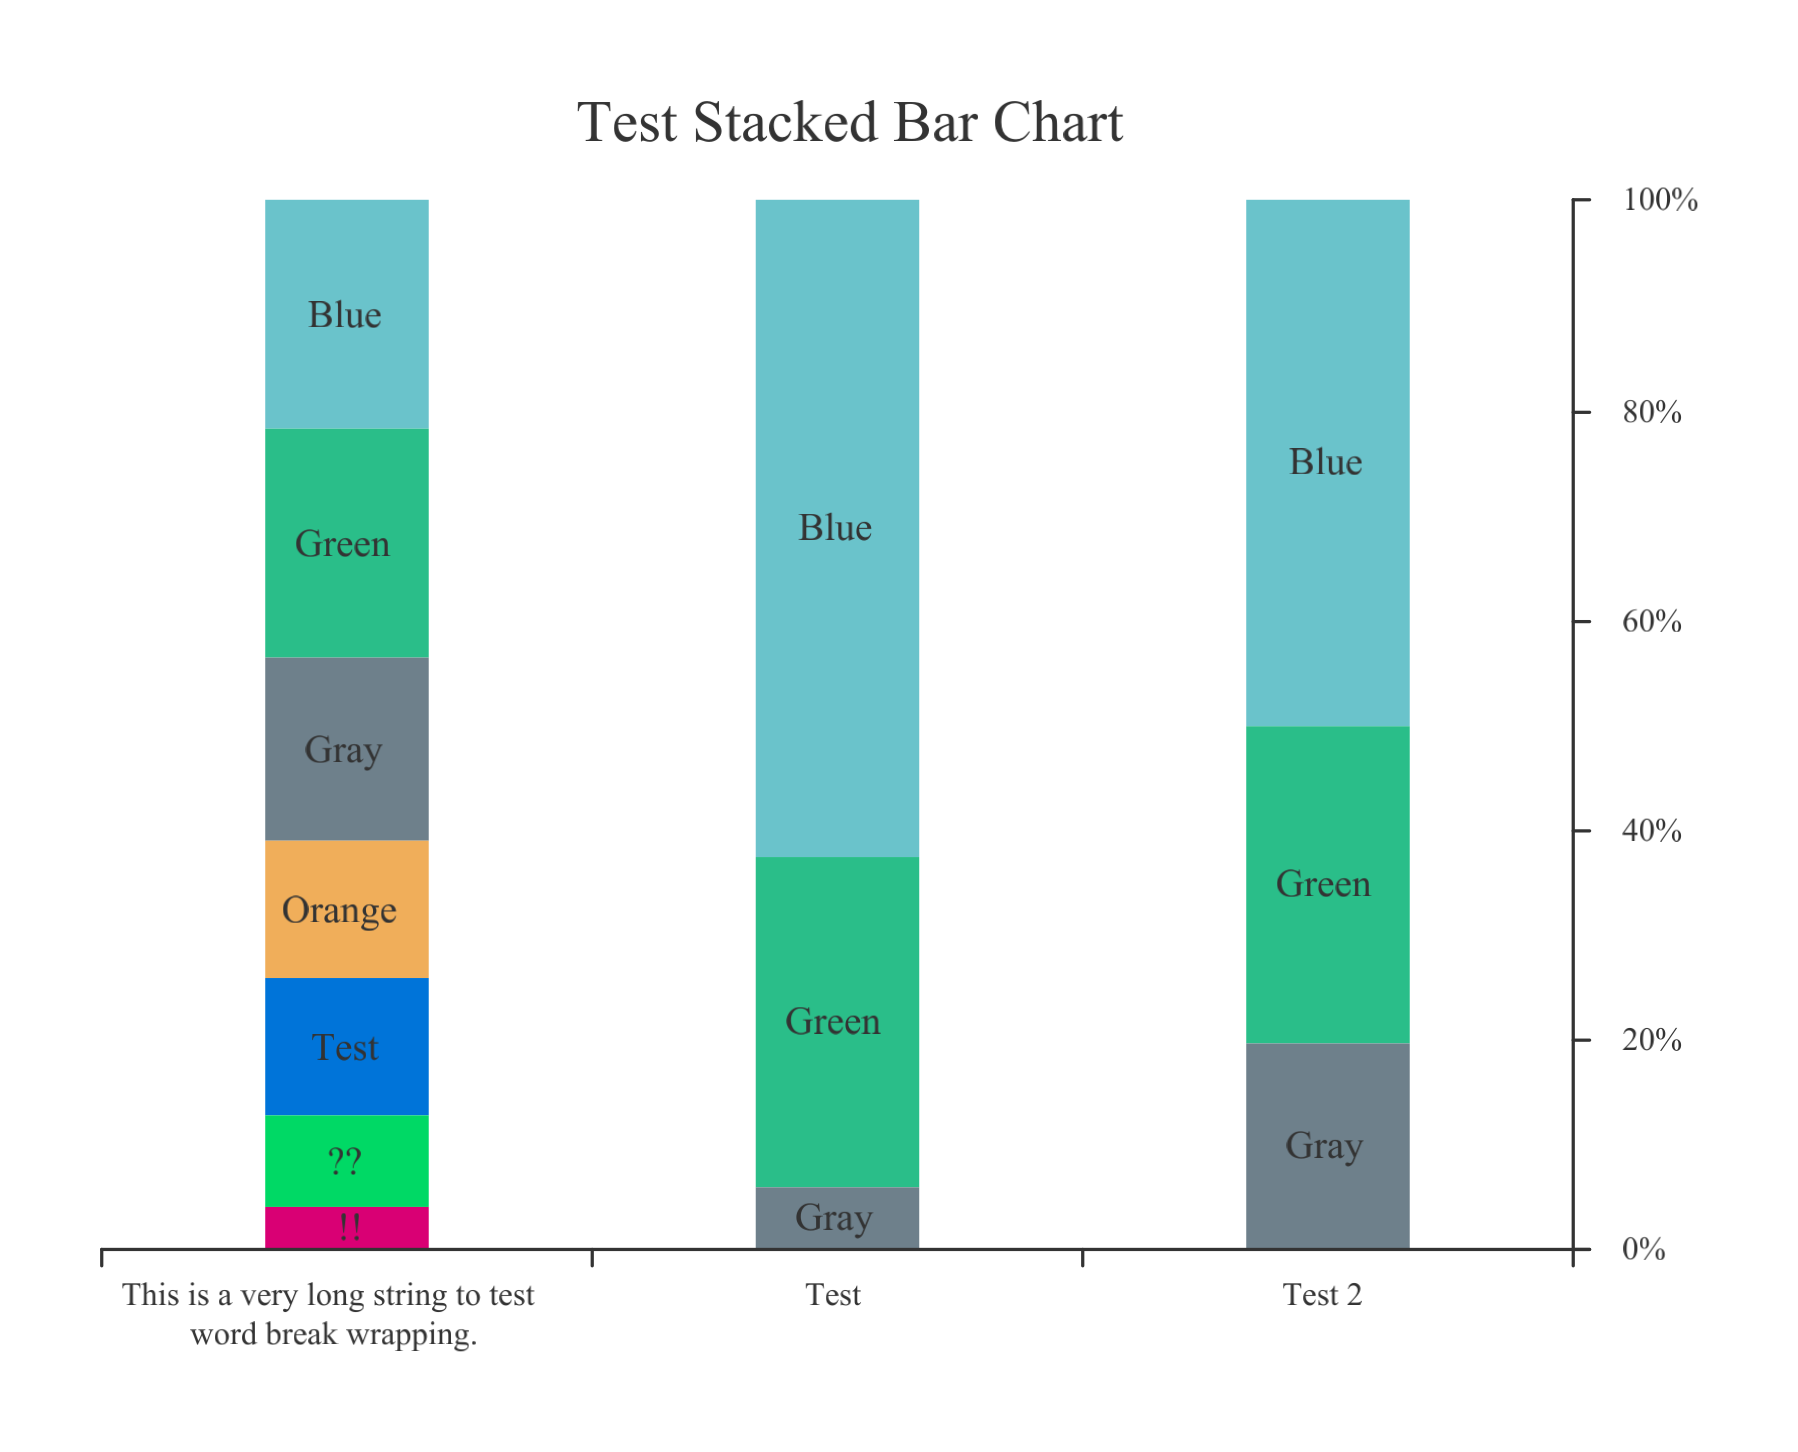 Sample stacked bar chart output